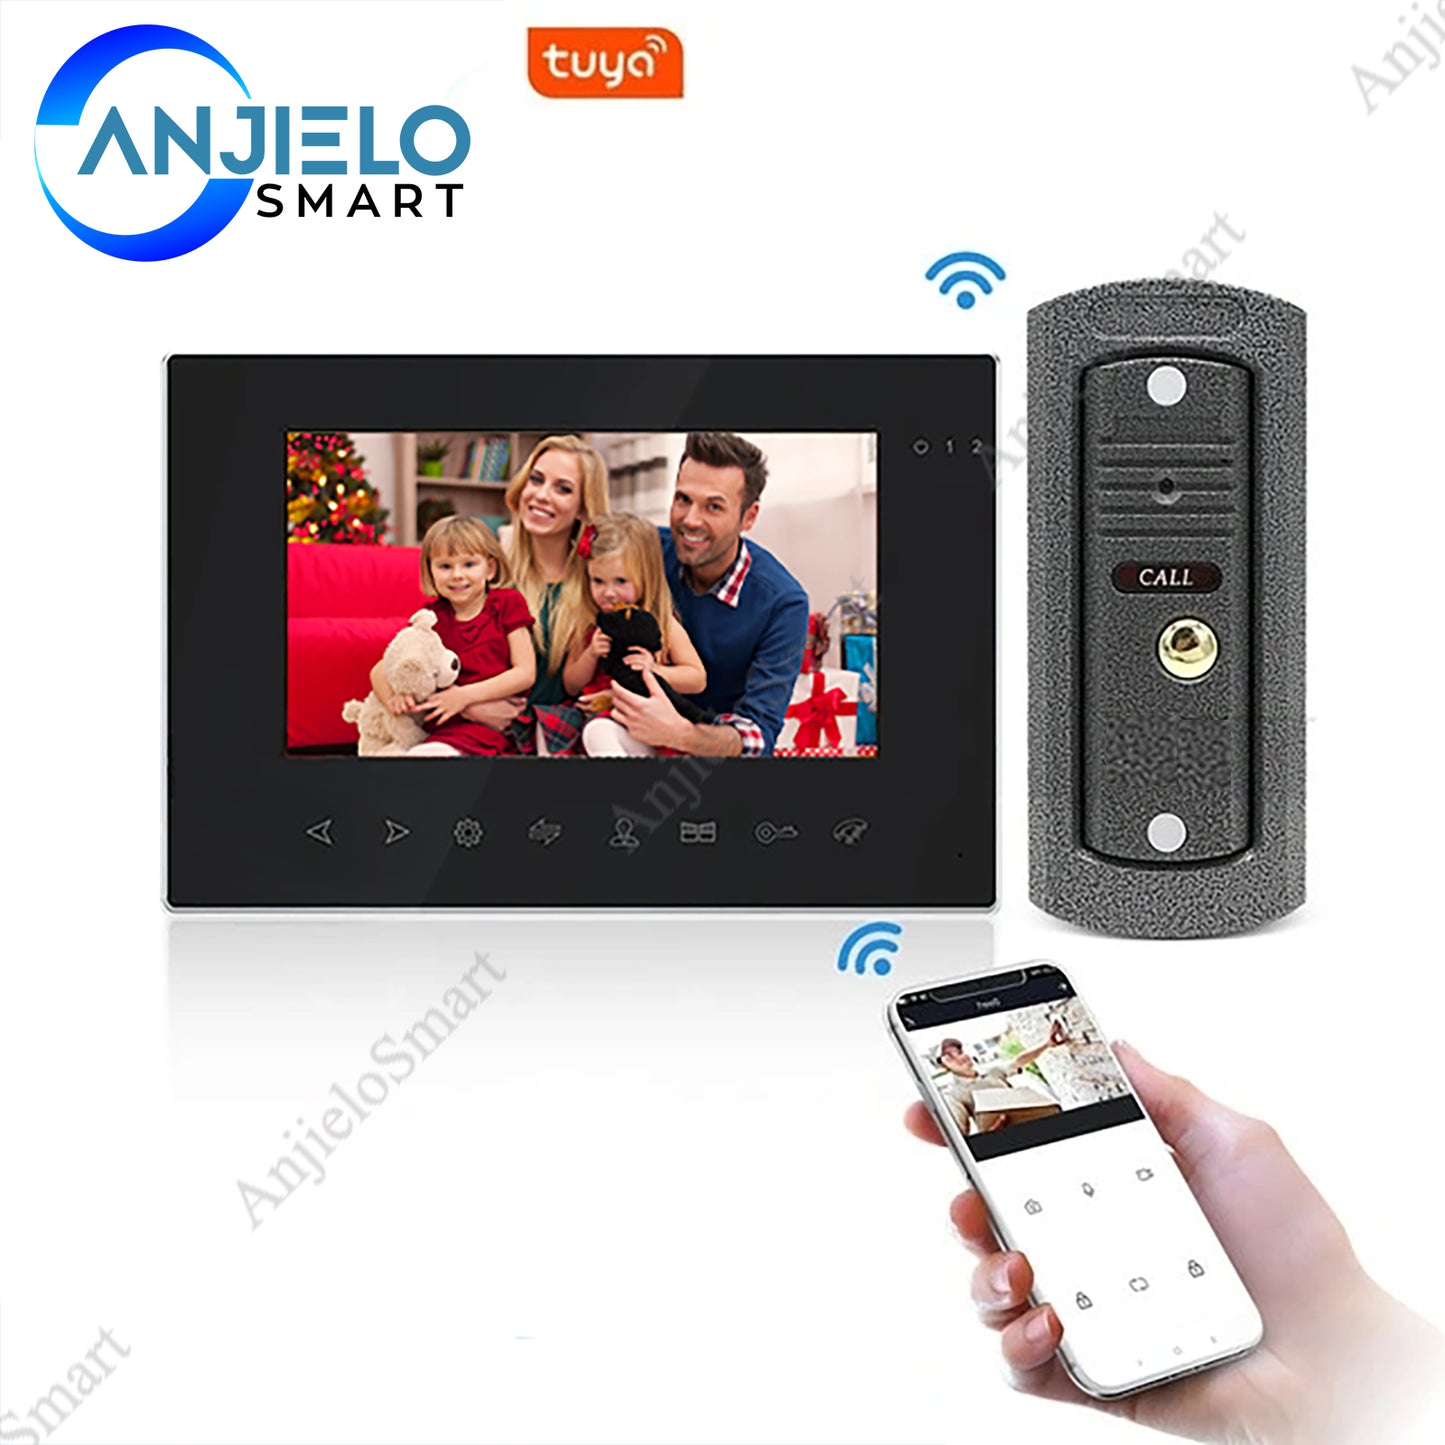 AnjieloSmart Tuya 7 Inch WiFi Video Door Phone Intercom System with AHD Wired Doorbell Camera Remote Motion Detection